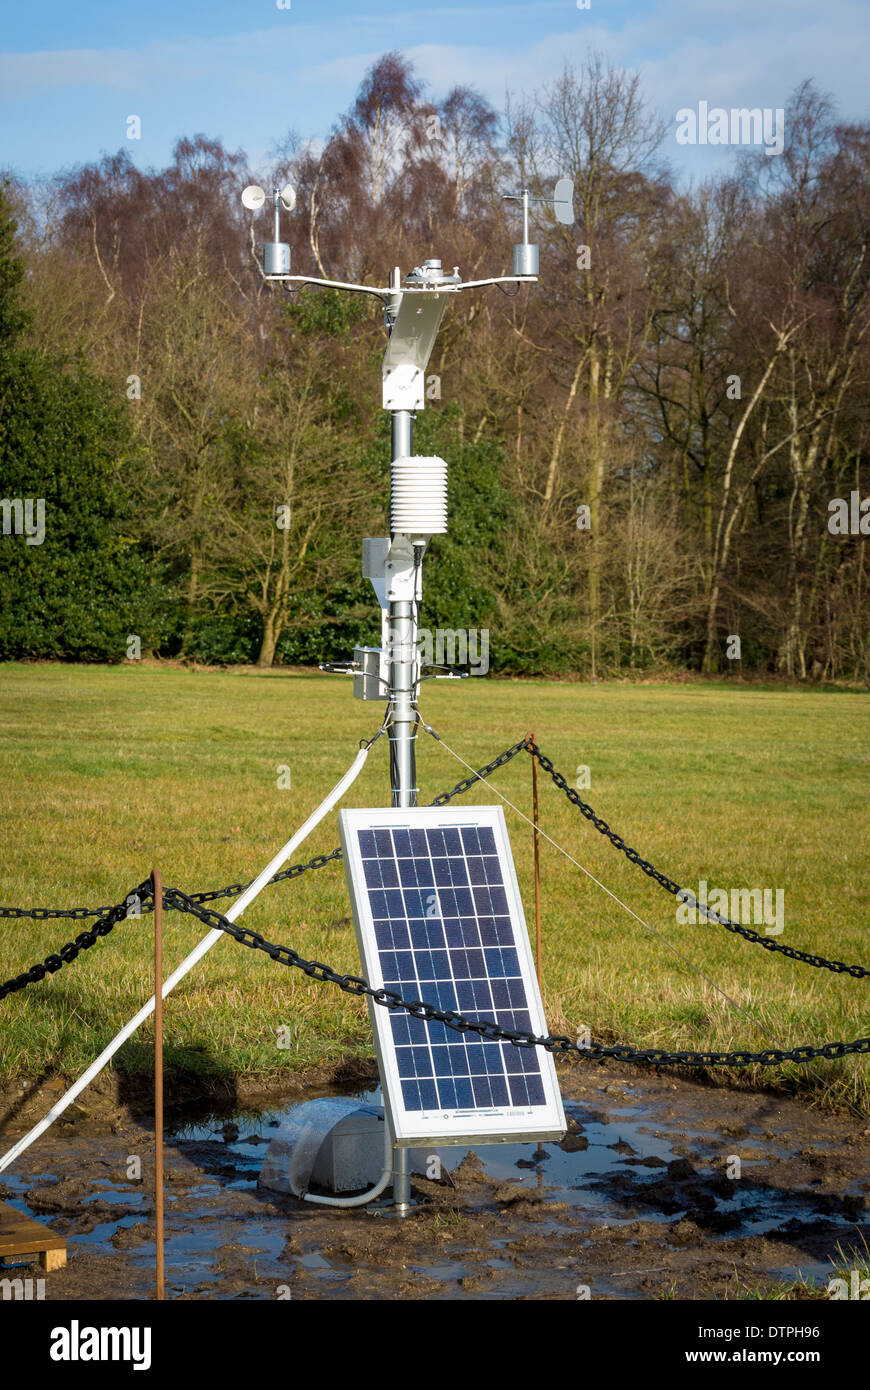 Small portable solar powered weather station Stock Photo